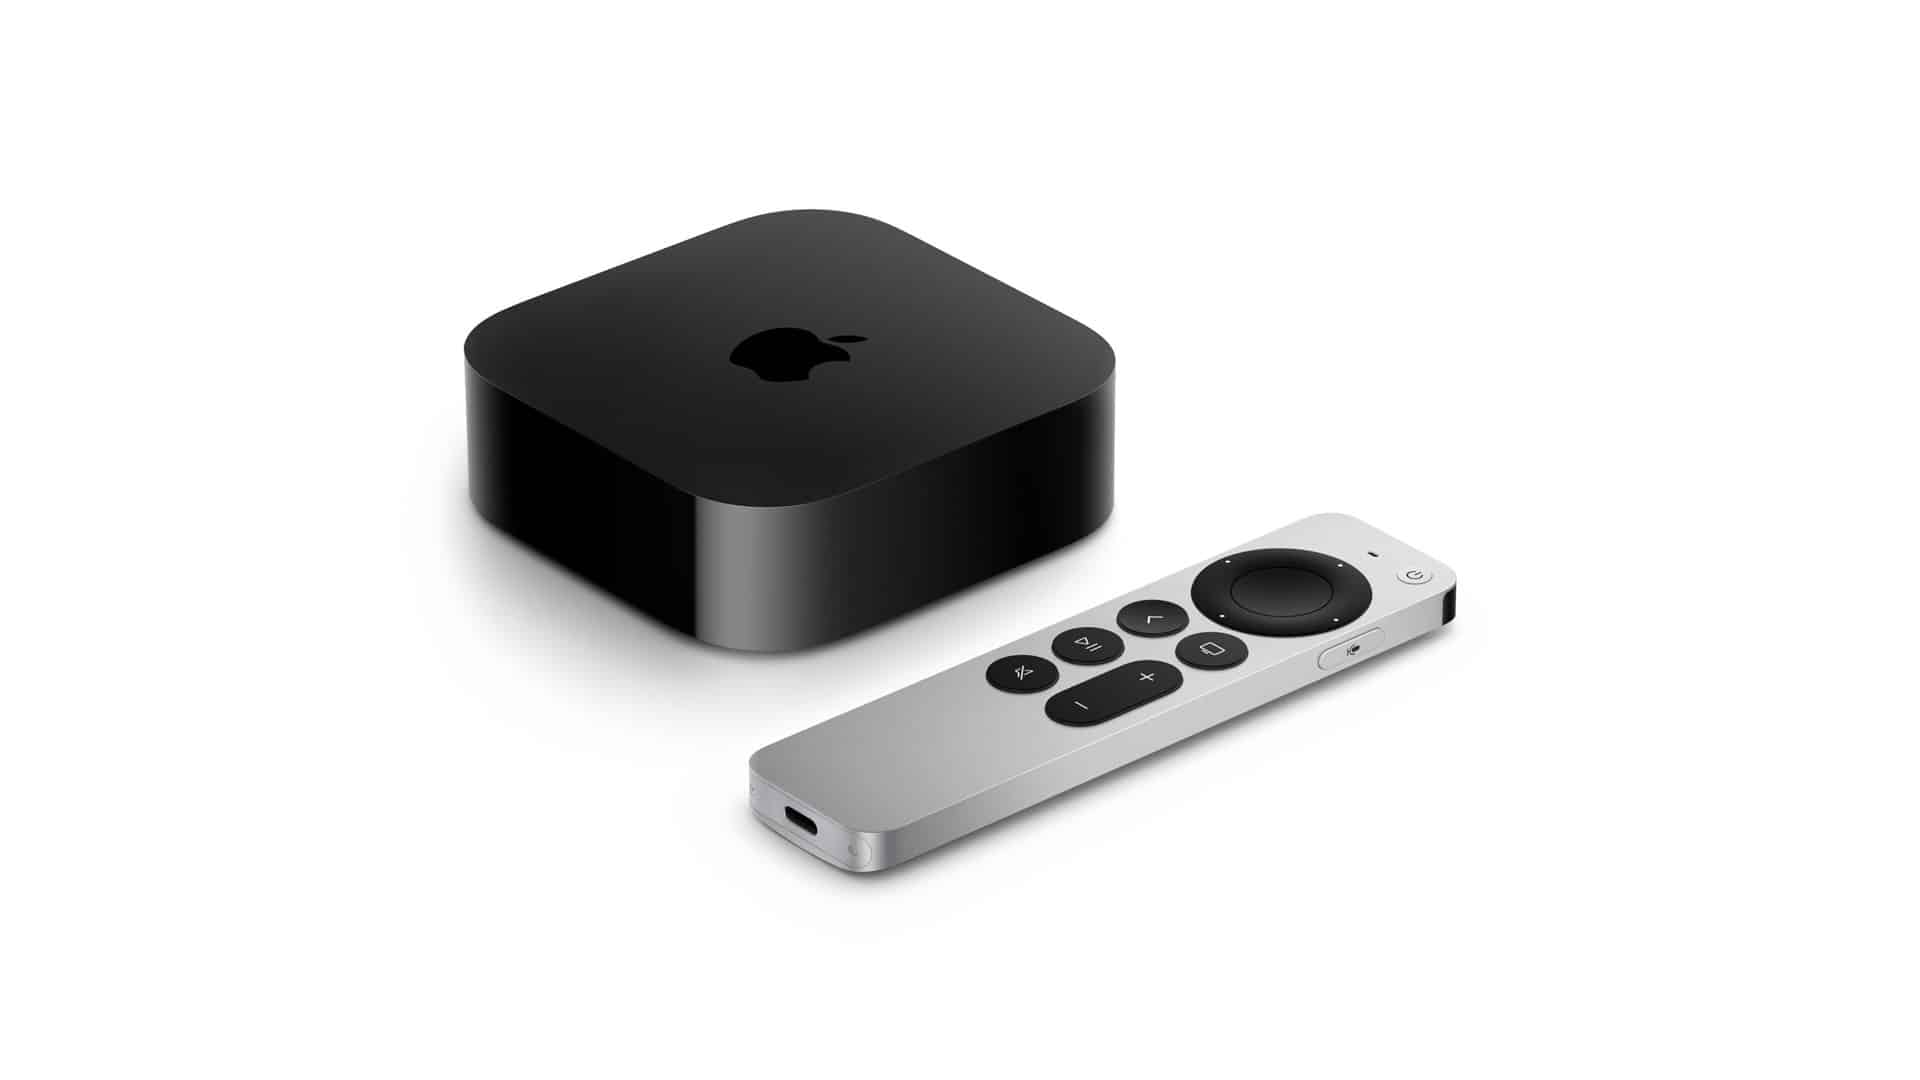 5 Of The Best Apple TV Utility Apps You Should Have Installed